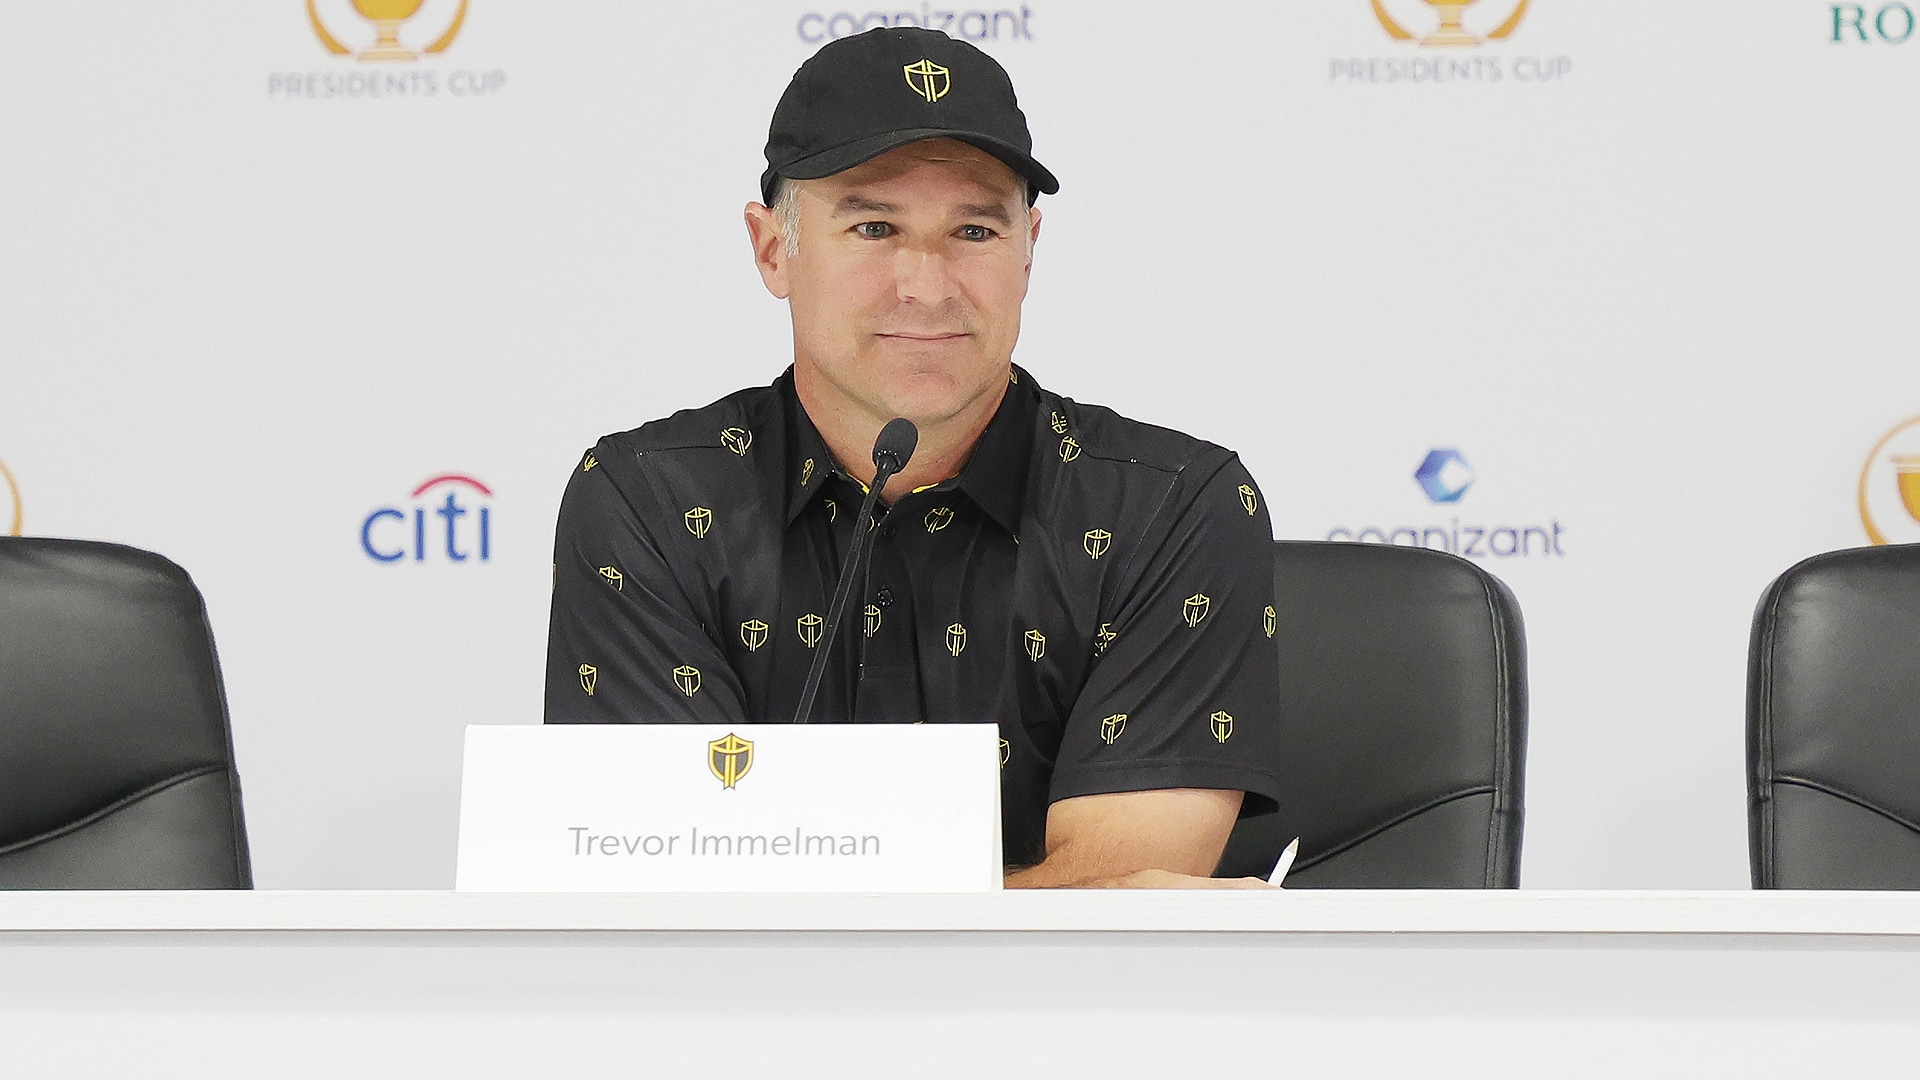 Trevor Immelman on Greg Norman’s Presidents Cup tweet: ‘I was laughing out loud.’